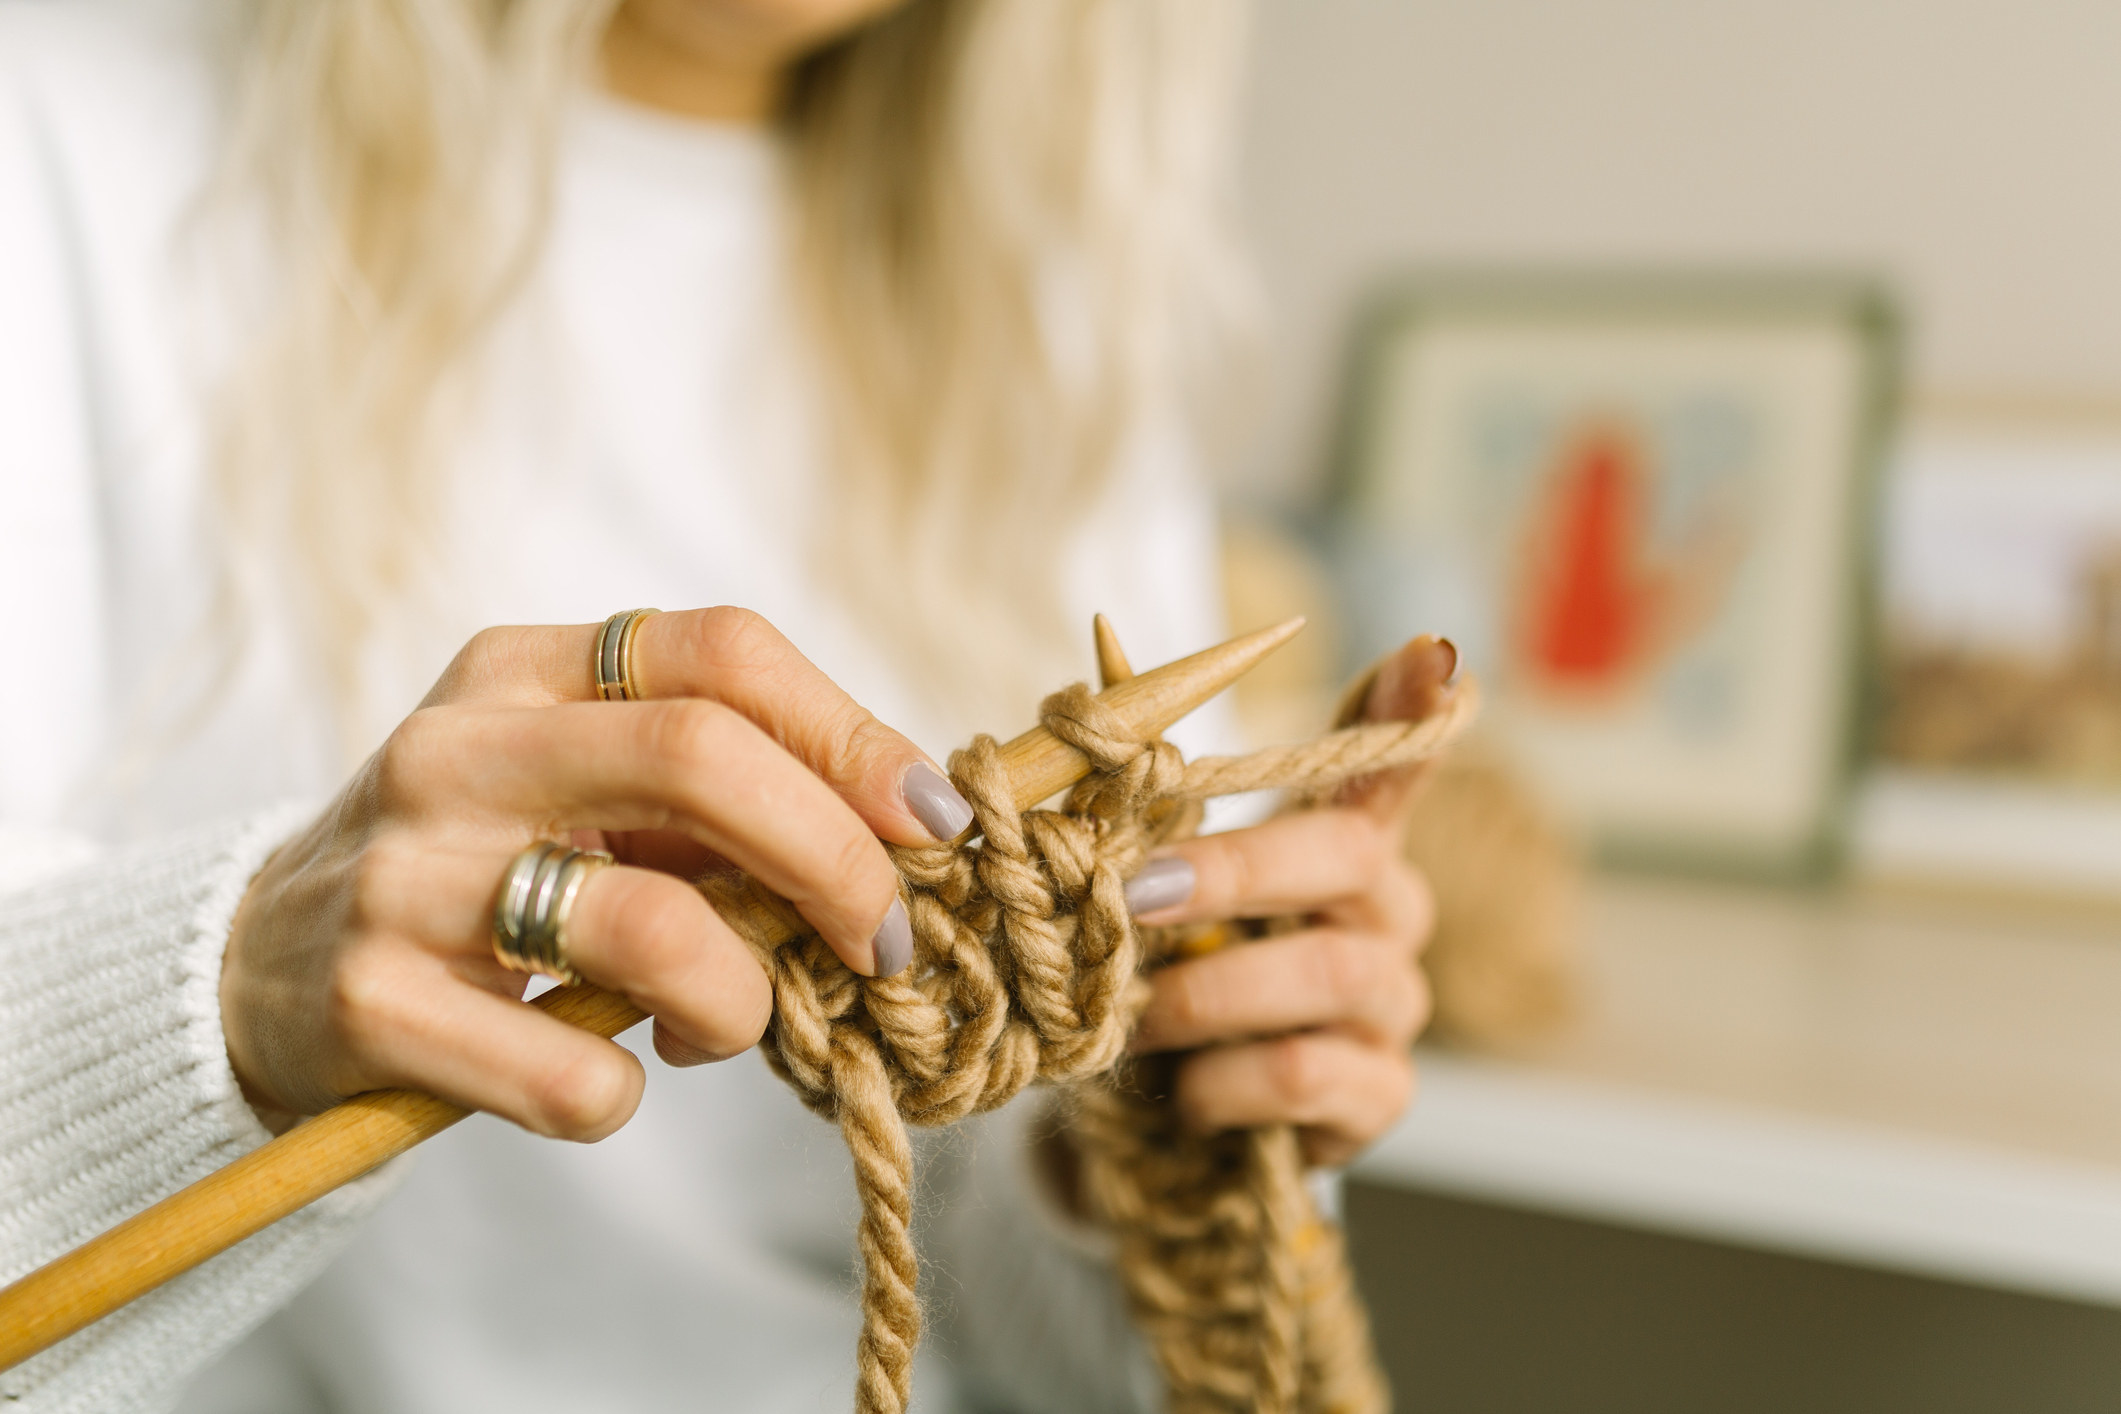 A woman knits with thick yarn.